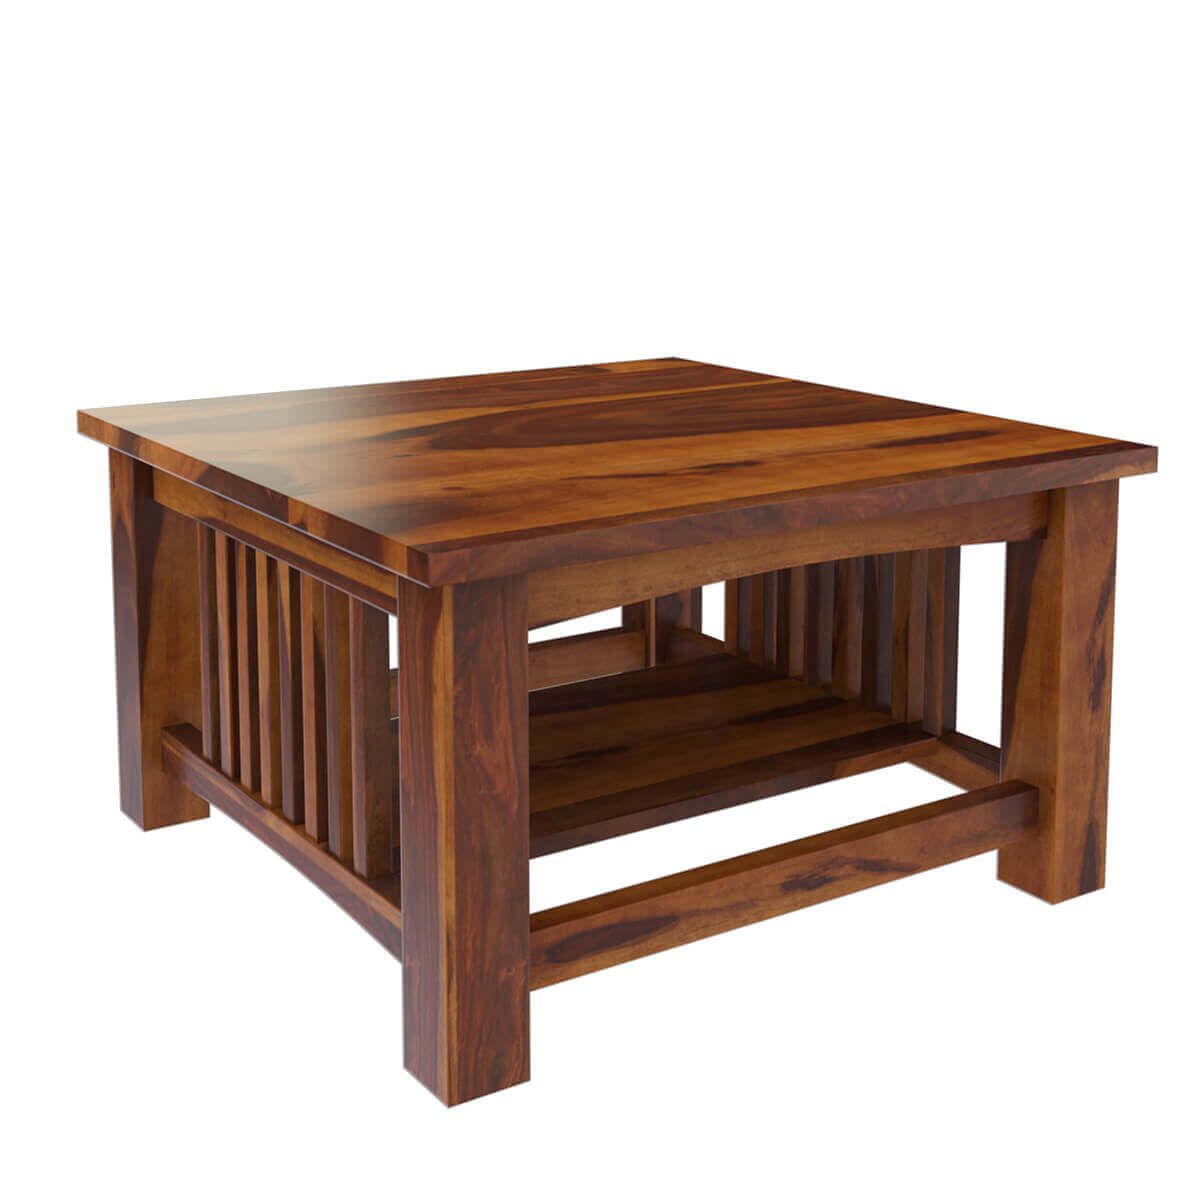 Jeddito Mission Rustic Solid Wood Square Coffee Table With Regard To Rustic Espresso Wood Console Tables (View 3 of 20)